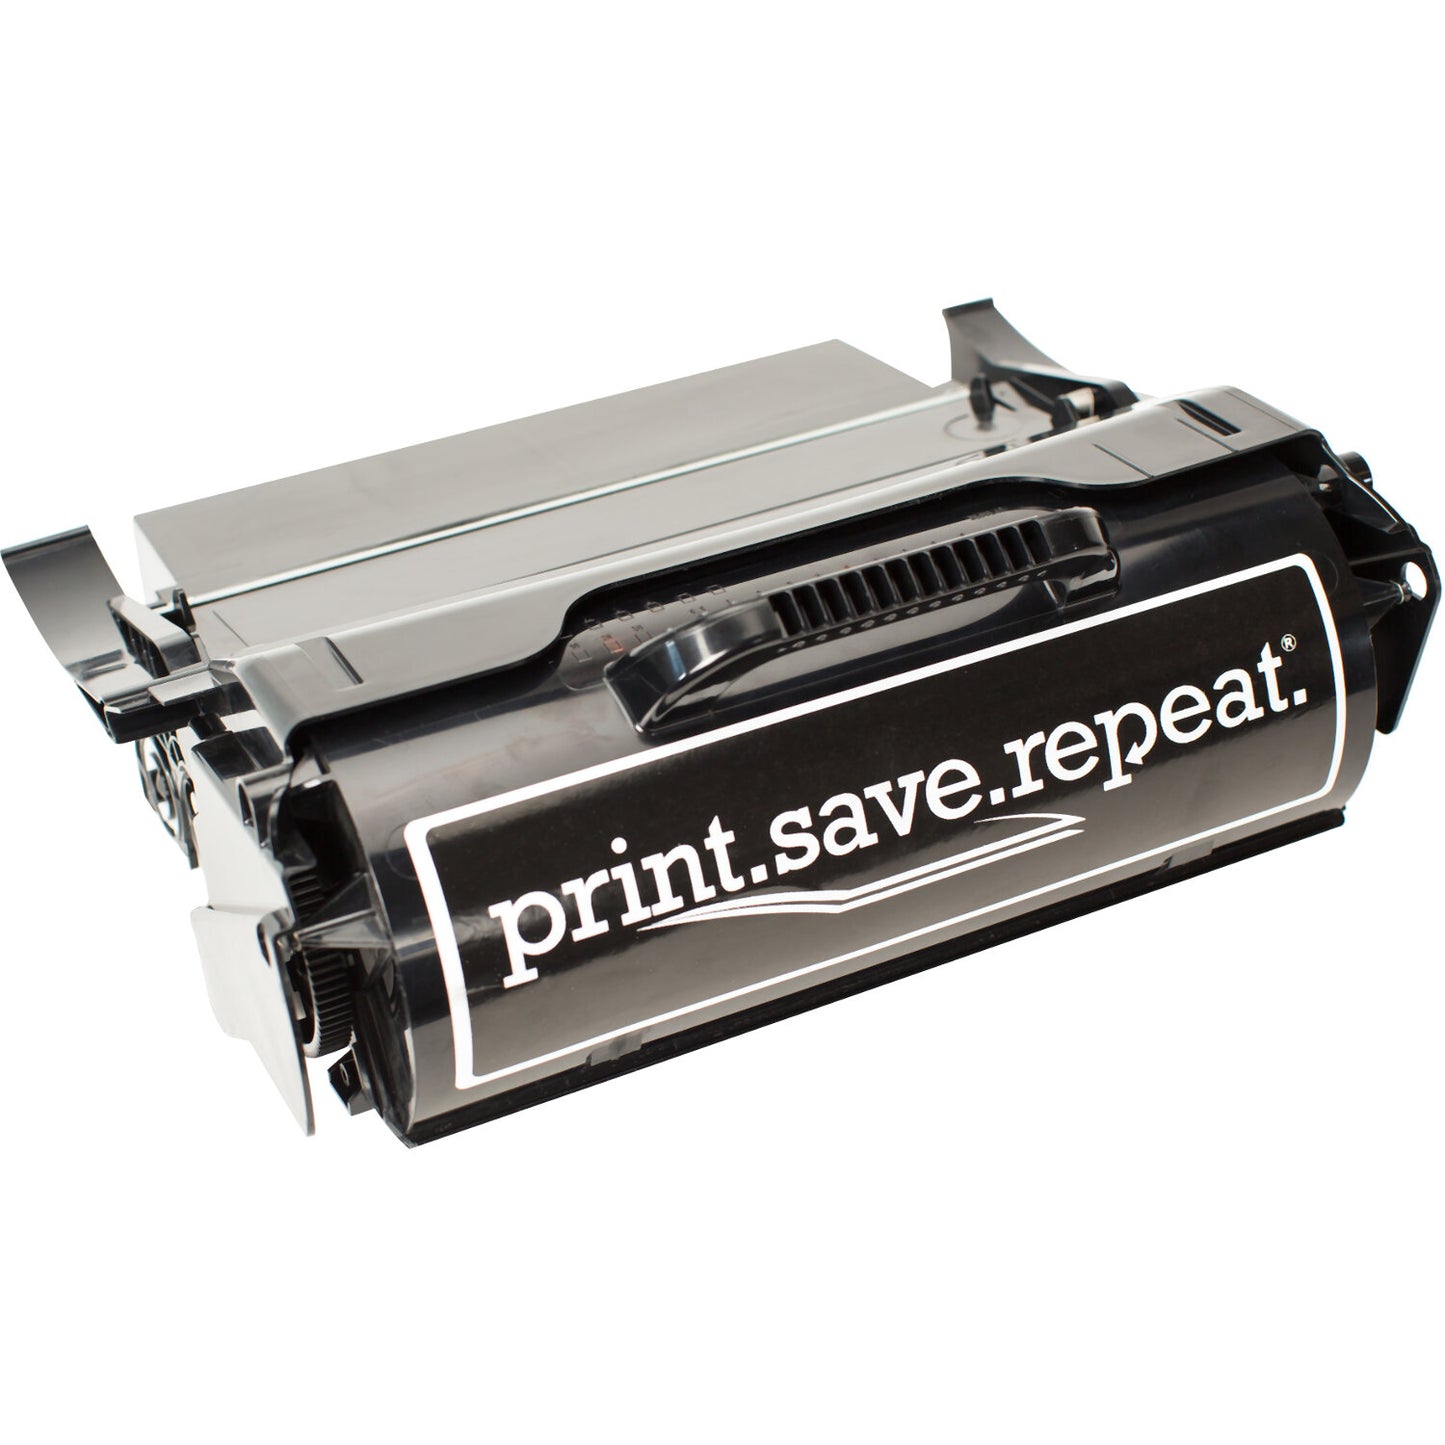 Print.Save.Repeat. Lexmark T654X11A Extra High Yield Remanufactured Toner Cartridge for T654, T656, TS654, TS656 [36,000 Pages]